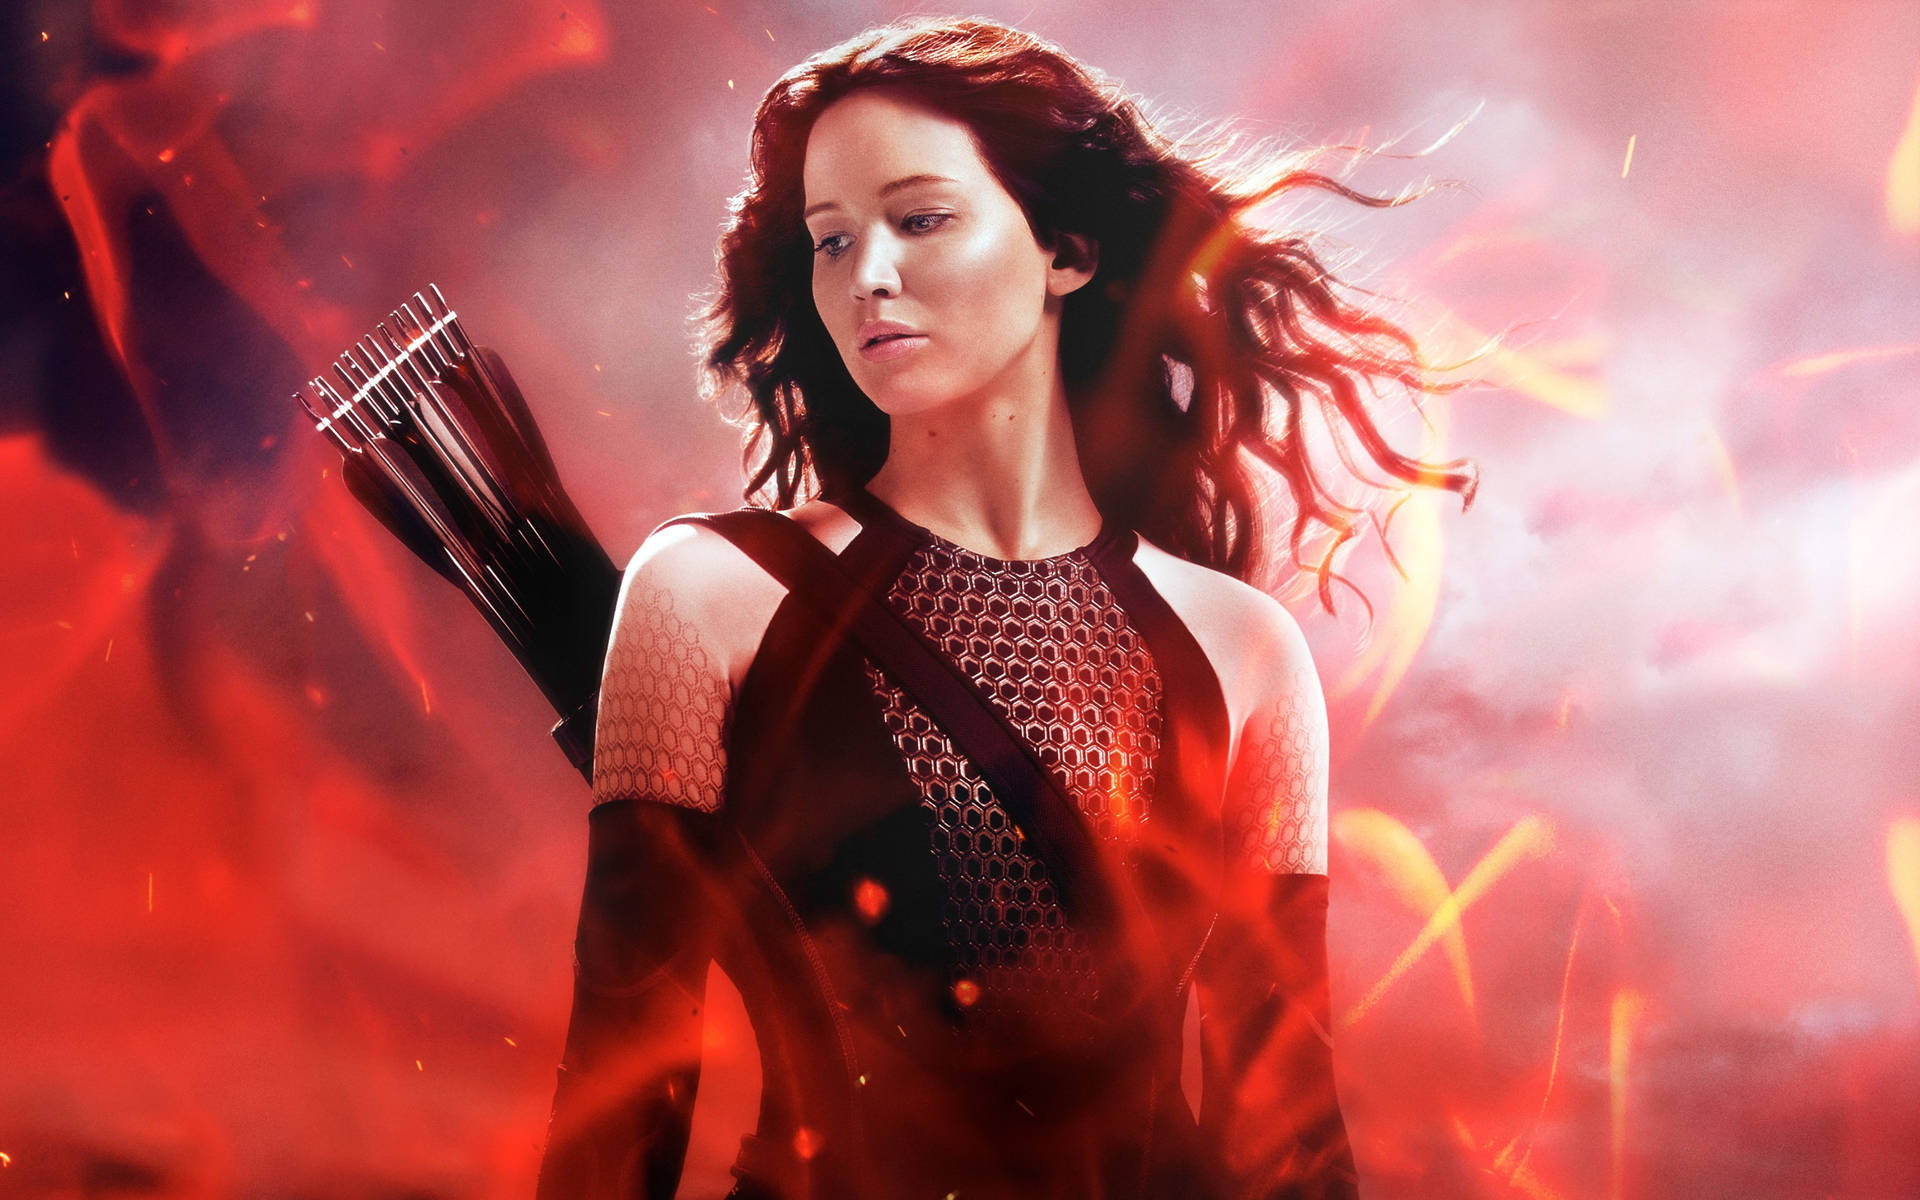 Jennifer Lawrence Hunger Games: Catching Fire